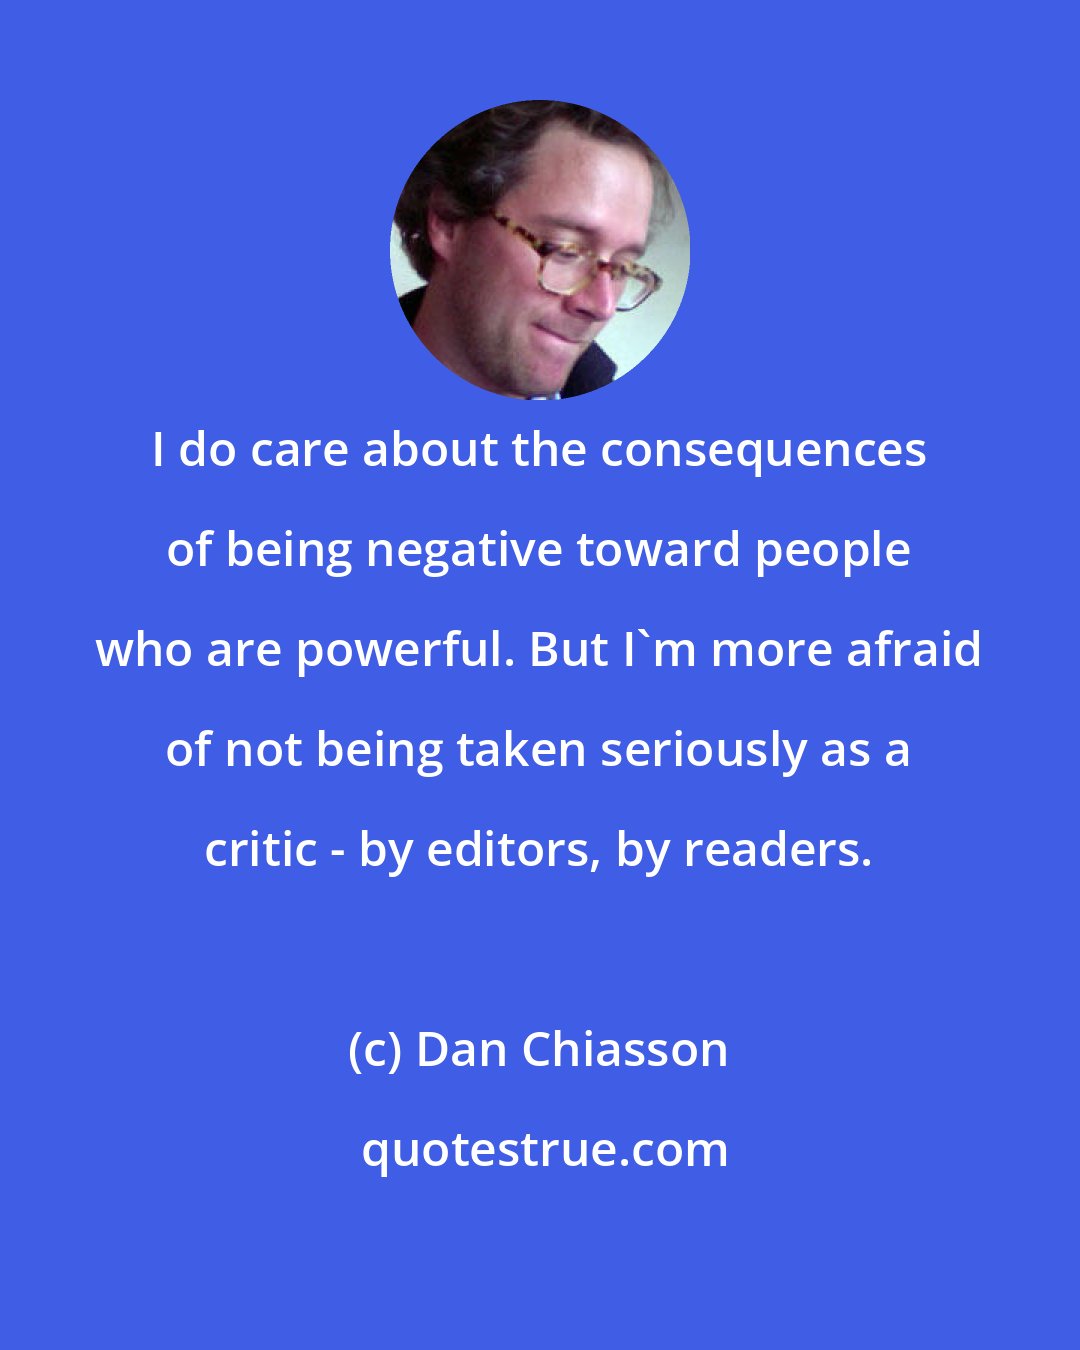 Dan Chiasson: I do care about the consequences of being negative toward people who are powerful. But I'm more afraid of not being taken seriously as a critic - by editors, by readers.